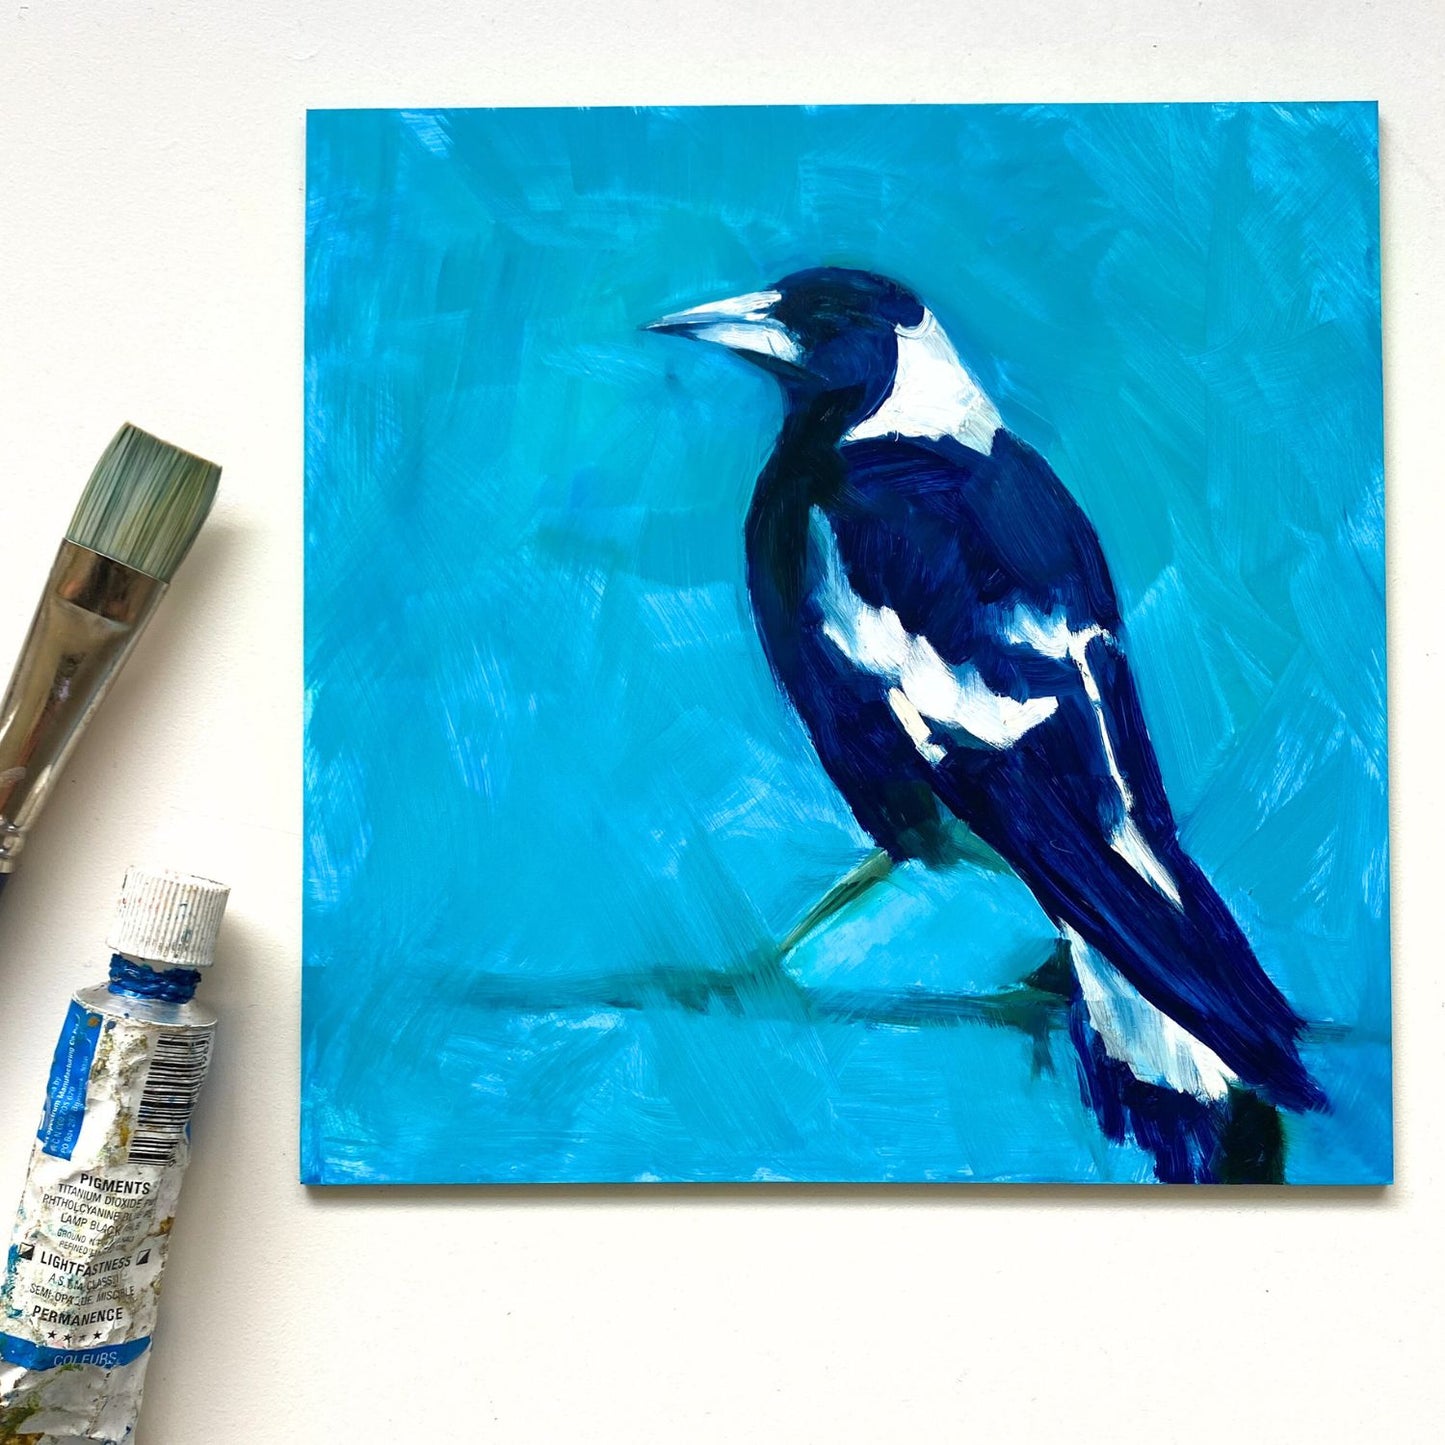 styled photo of an original oil painting of the profile of a navy blue and white magpie on a textured turquoise background. The painting is on a white desk and there's a paintbrush and oil paint tube next to it.